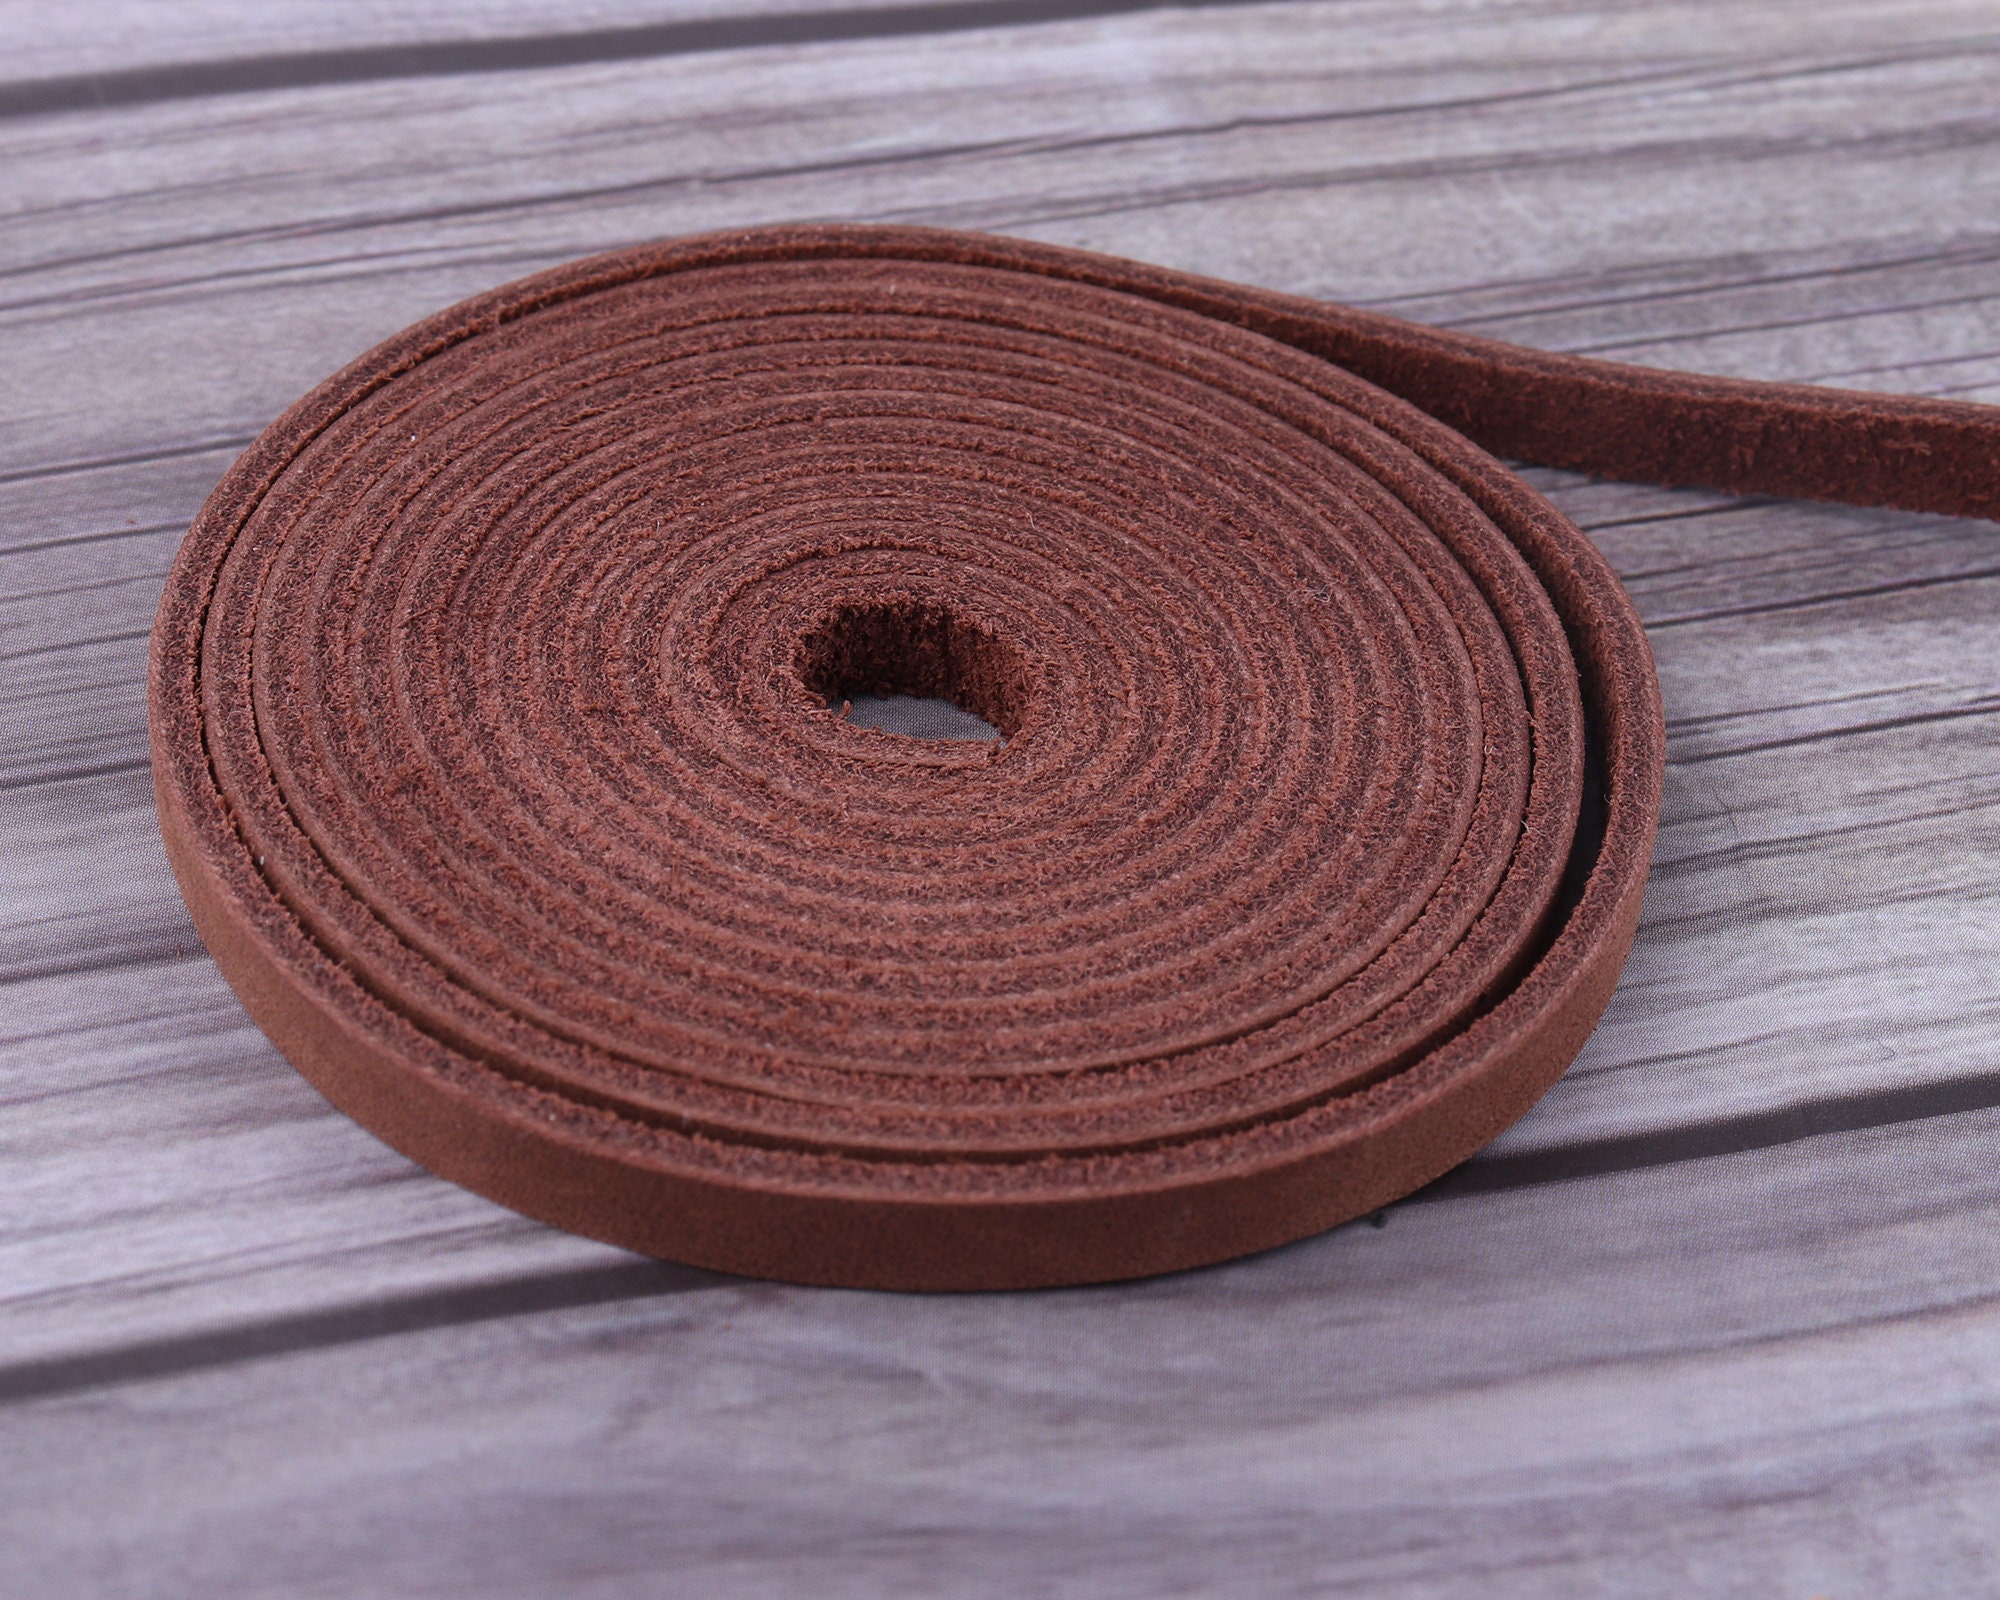 5mm Leather Cord,flat Leather Lace for Bracelet,genuine Leather  Strap,cowhide Leather Strips,leather Supplies,jewelry Making Leather String  